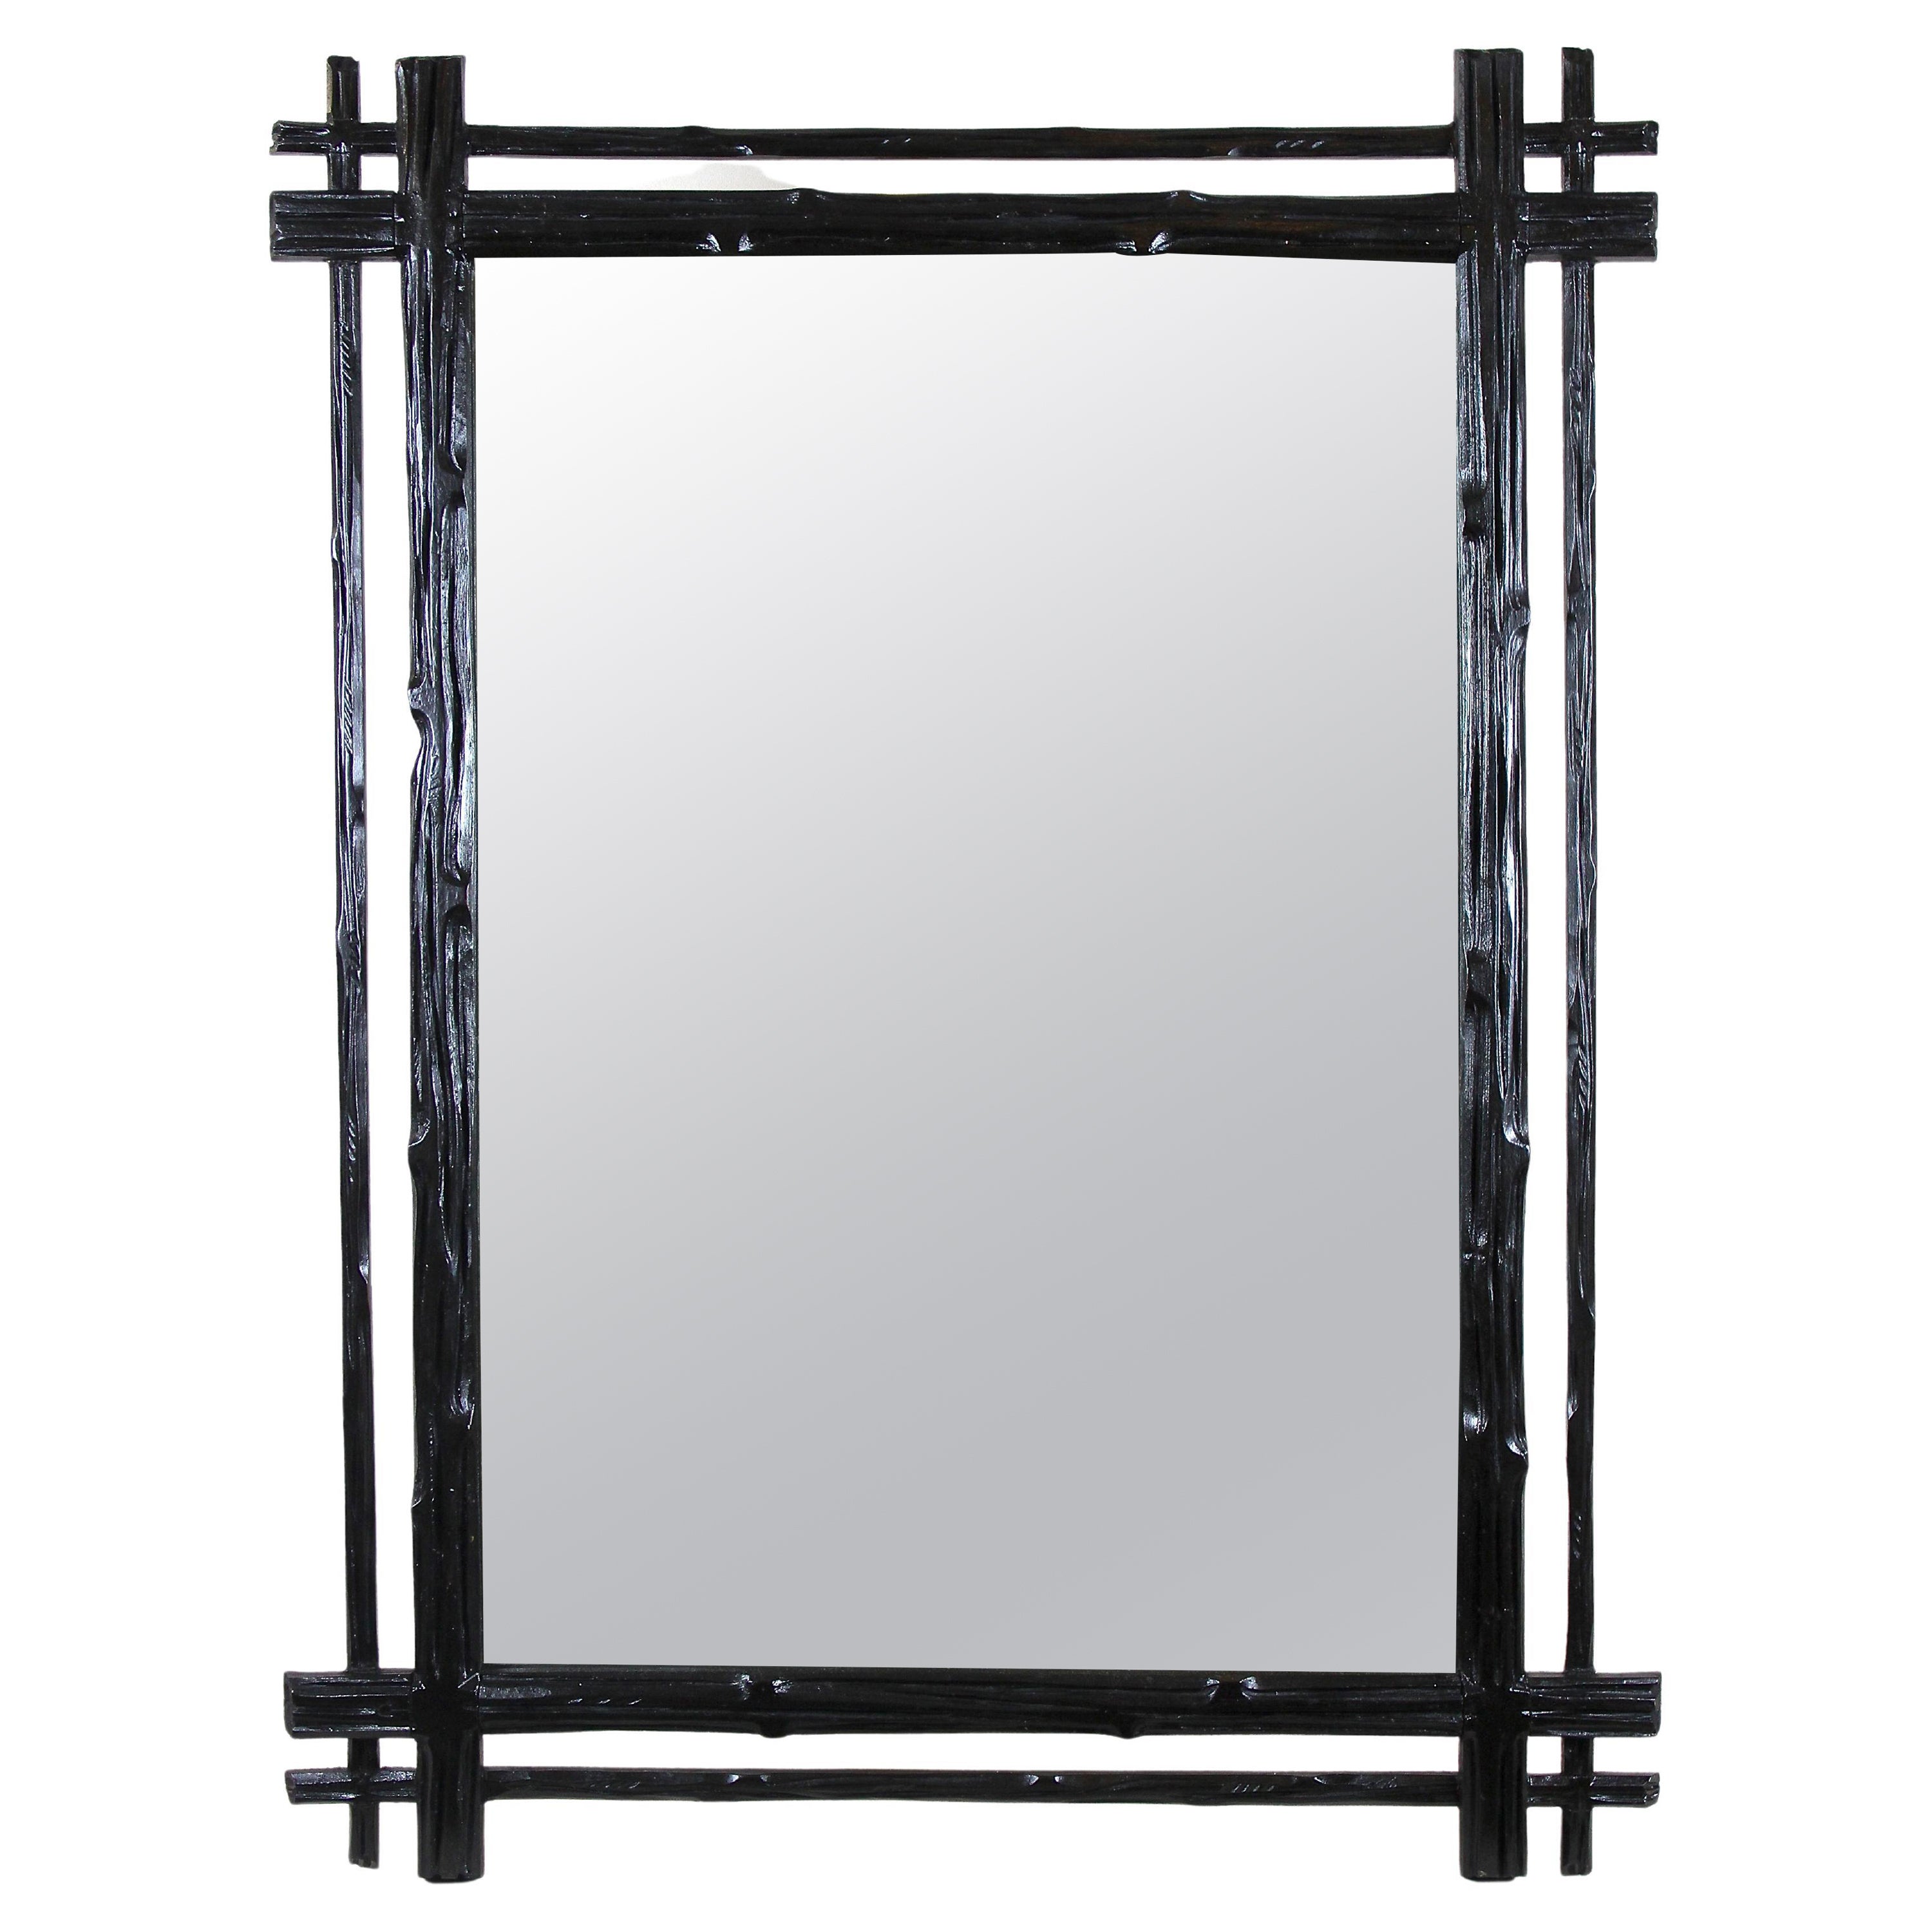 Black Forest Rustic Wall Mirror with Double Frame, Austria, circa 1880